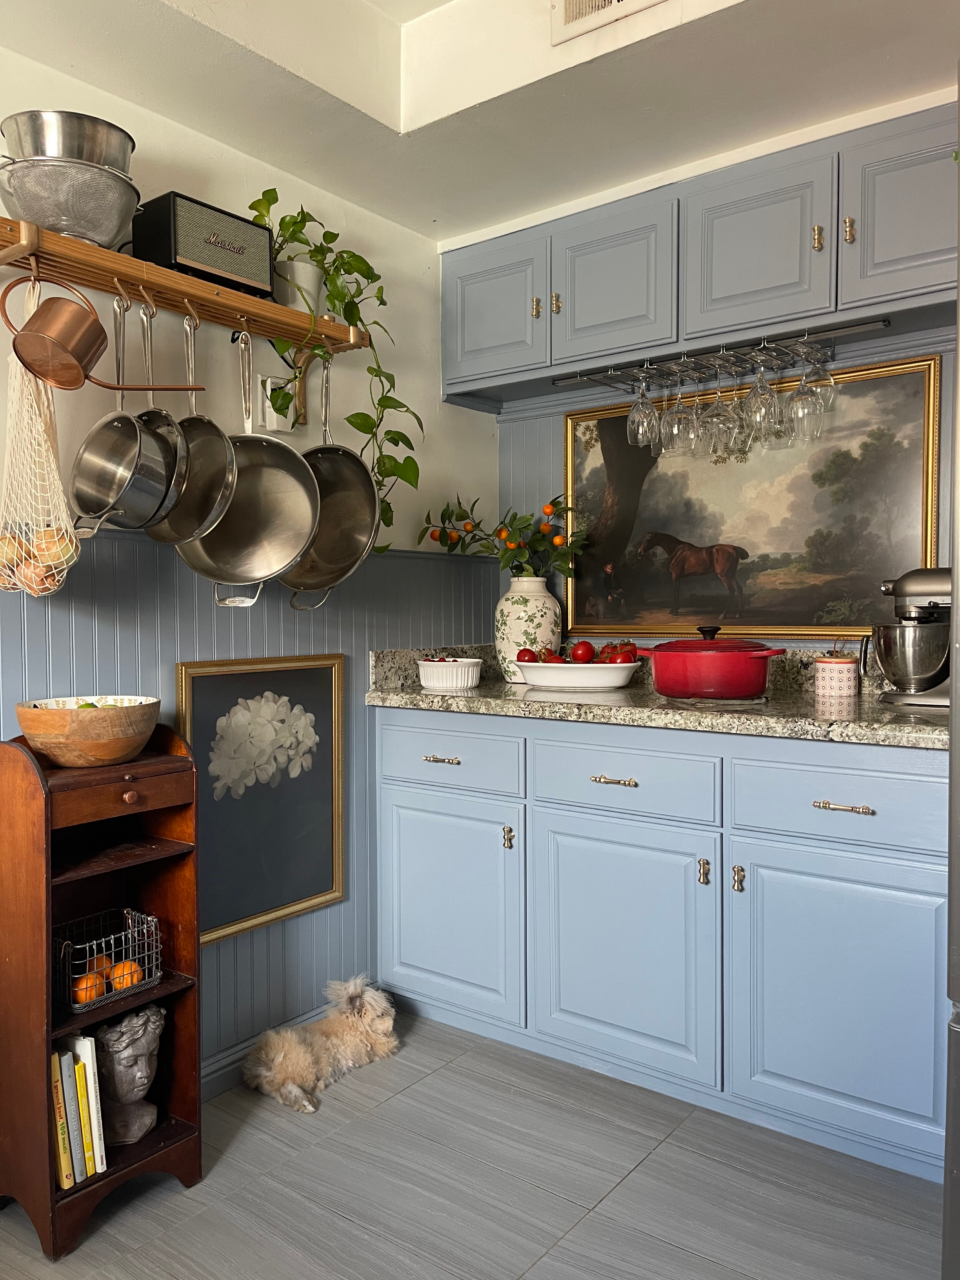 Content in a Cottage: Country Kitchen w/ Copper Pots